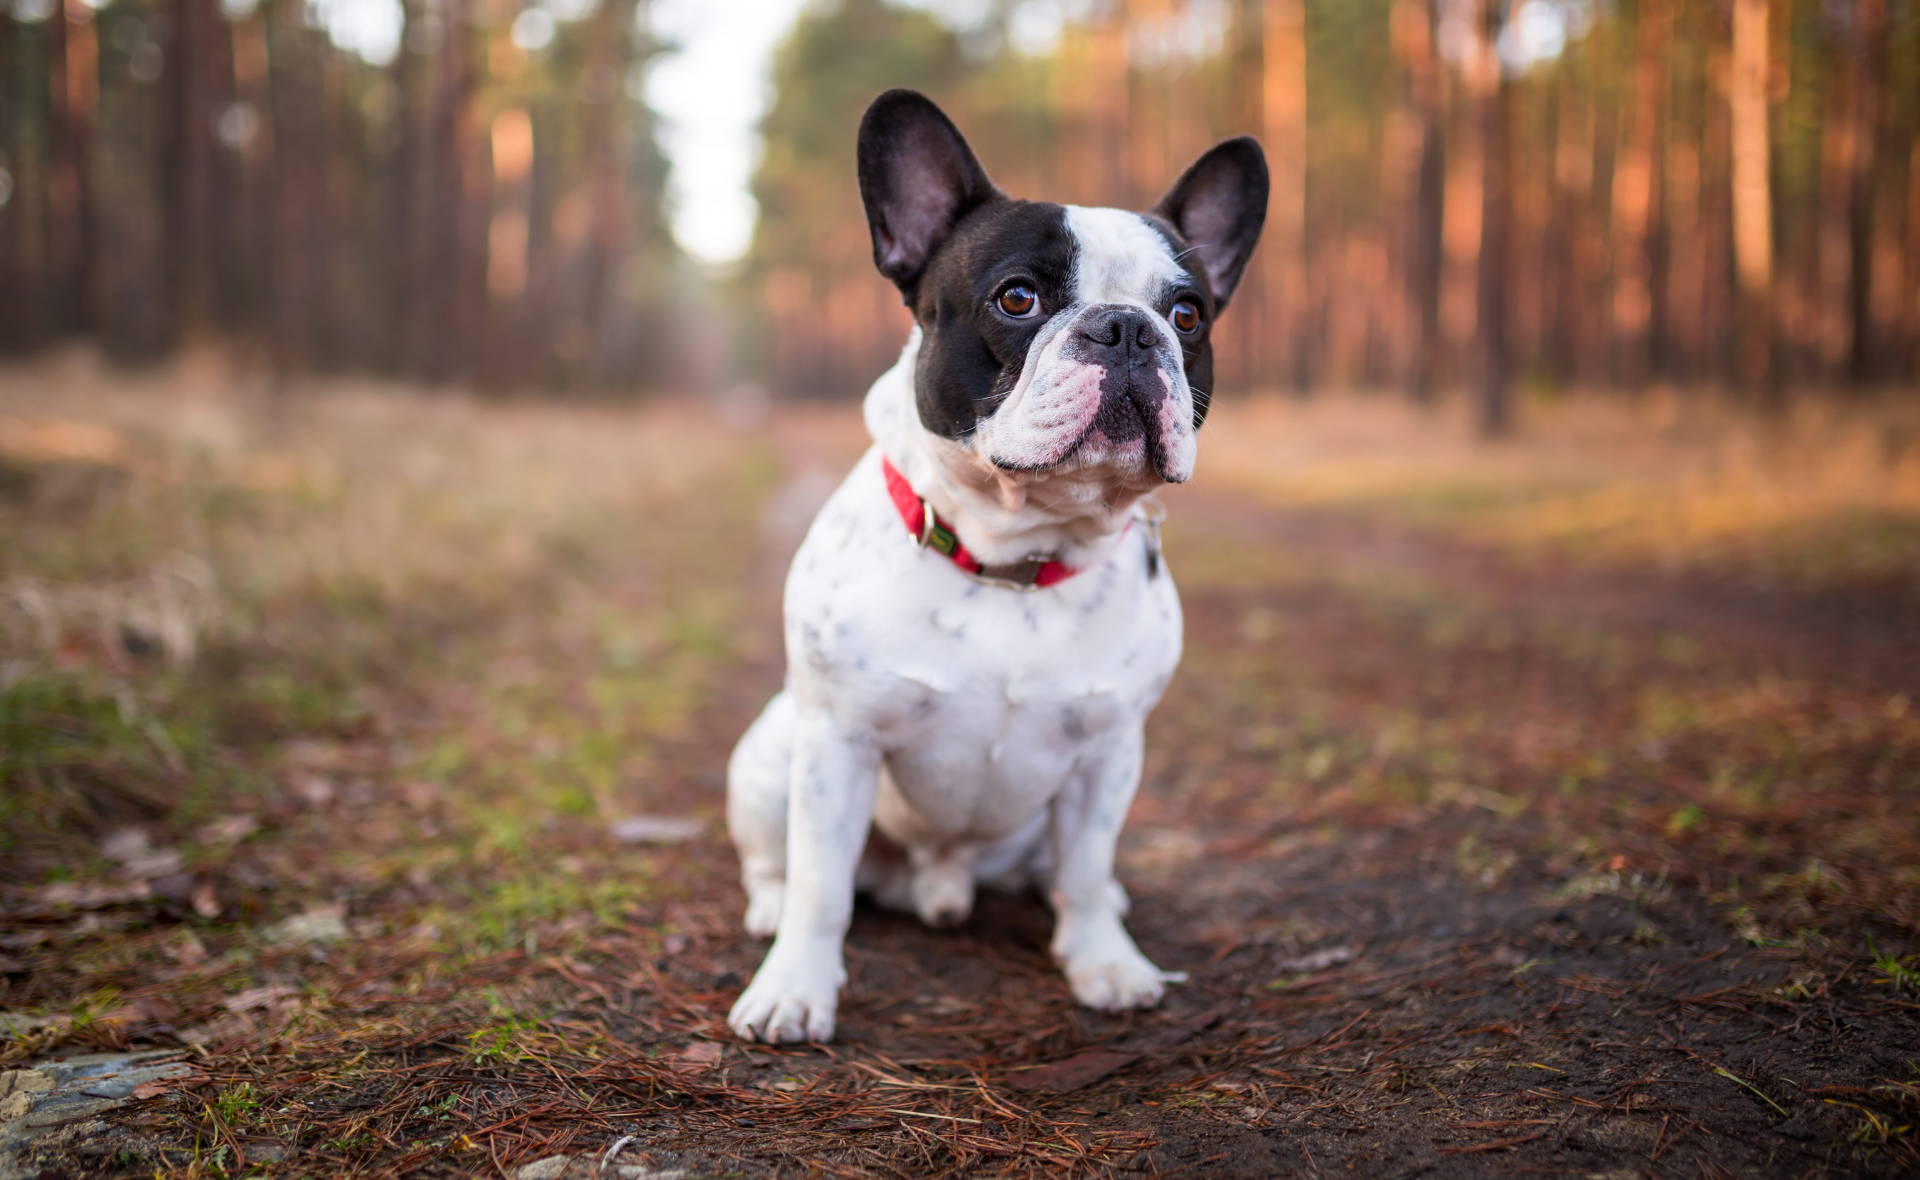 What Is The Best Food For French Bulldogs?